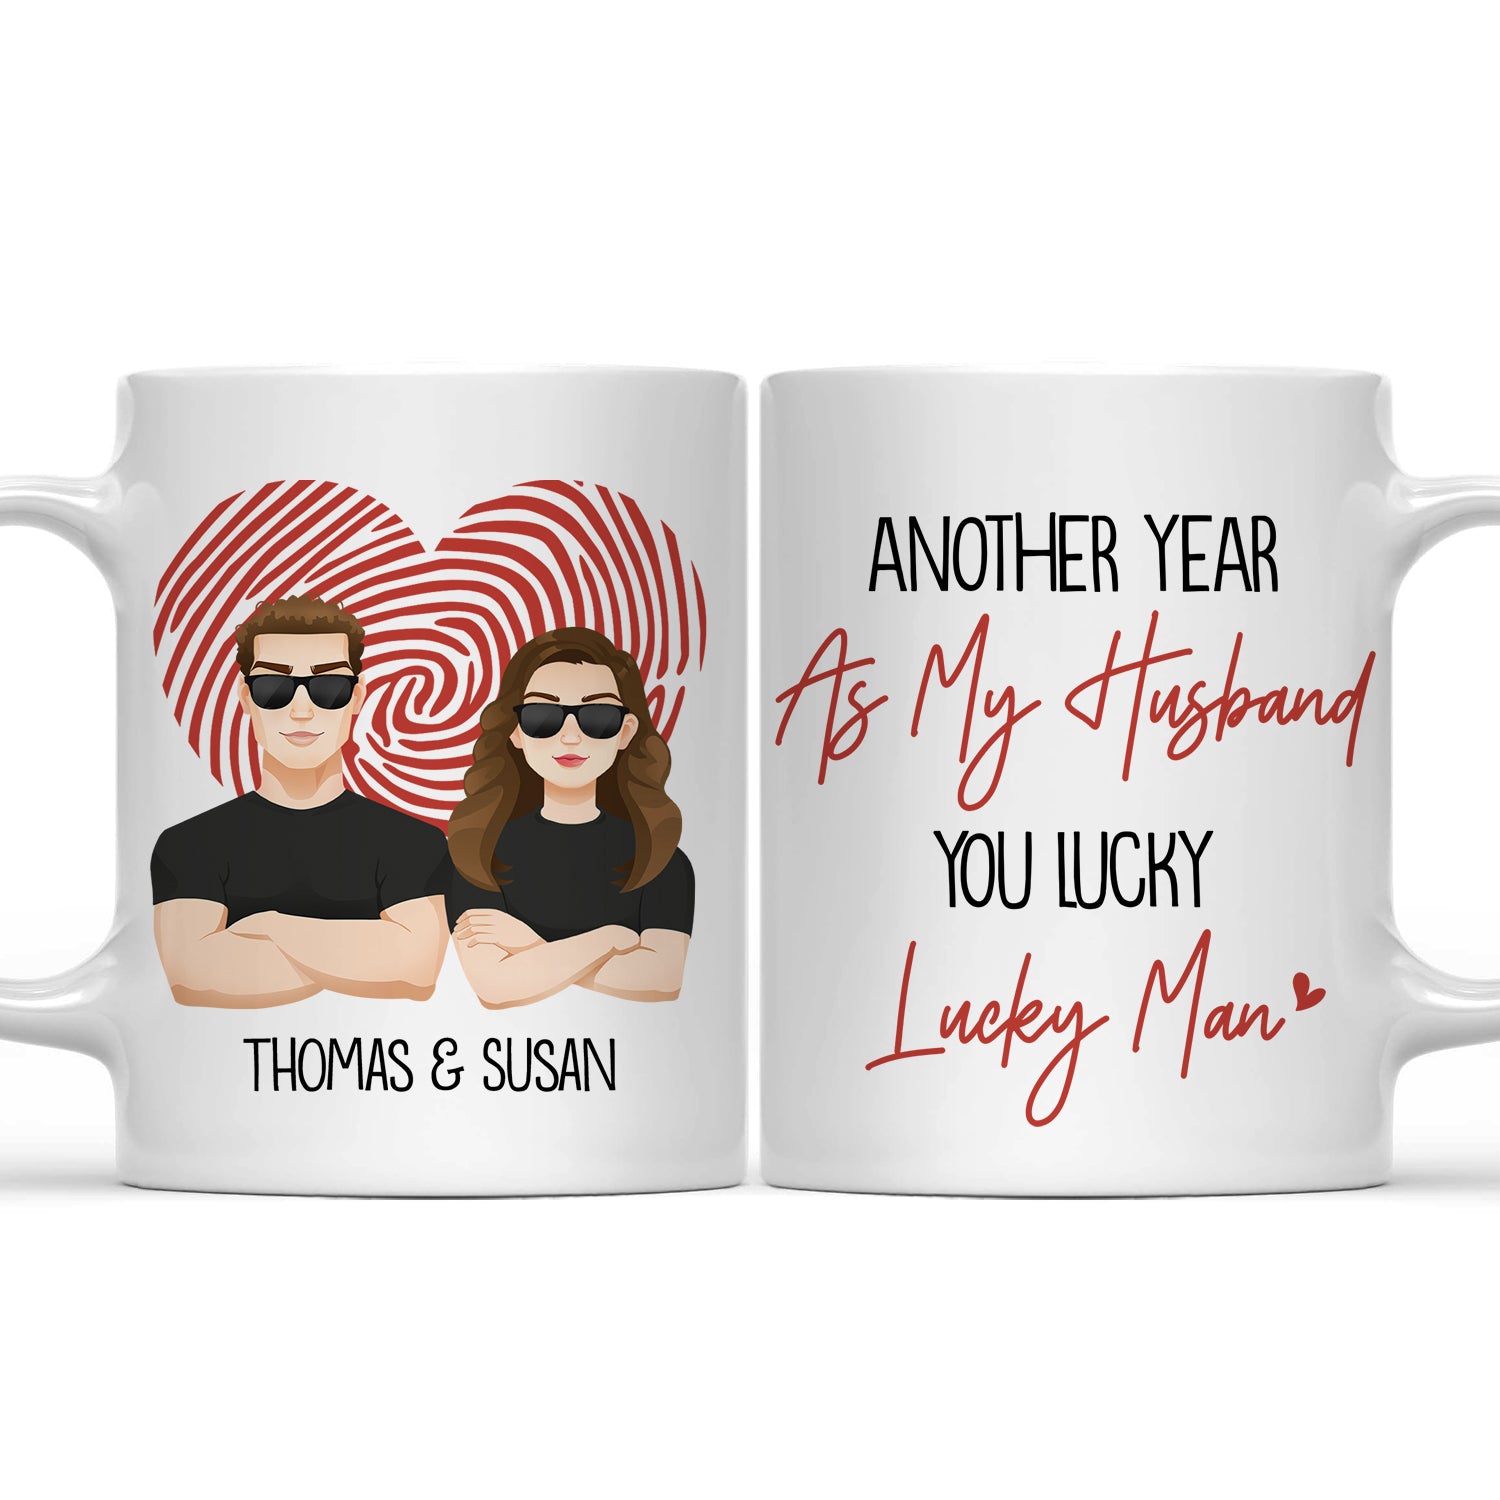 Another Year As My Husband - Gift For Couples - Personalized Mug